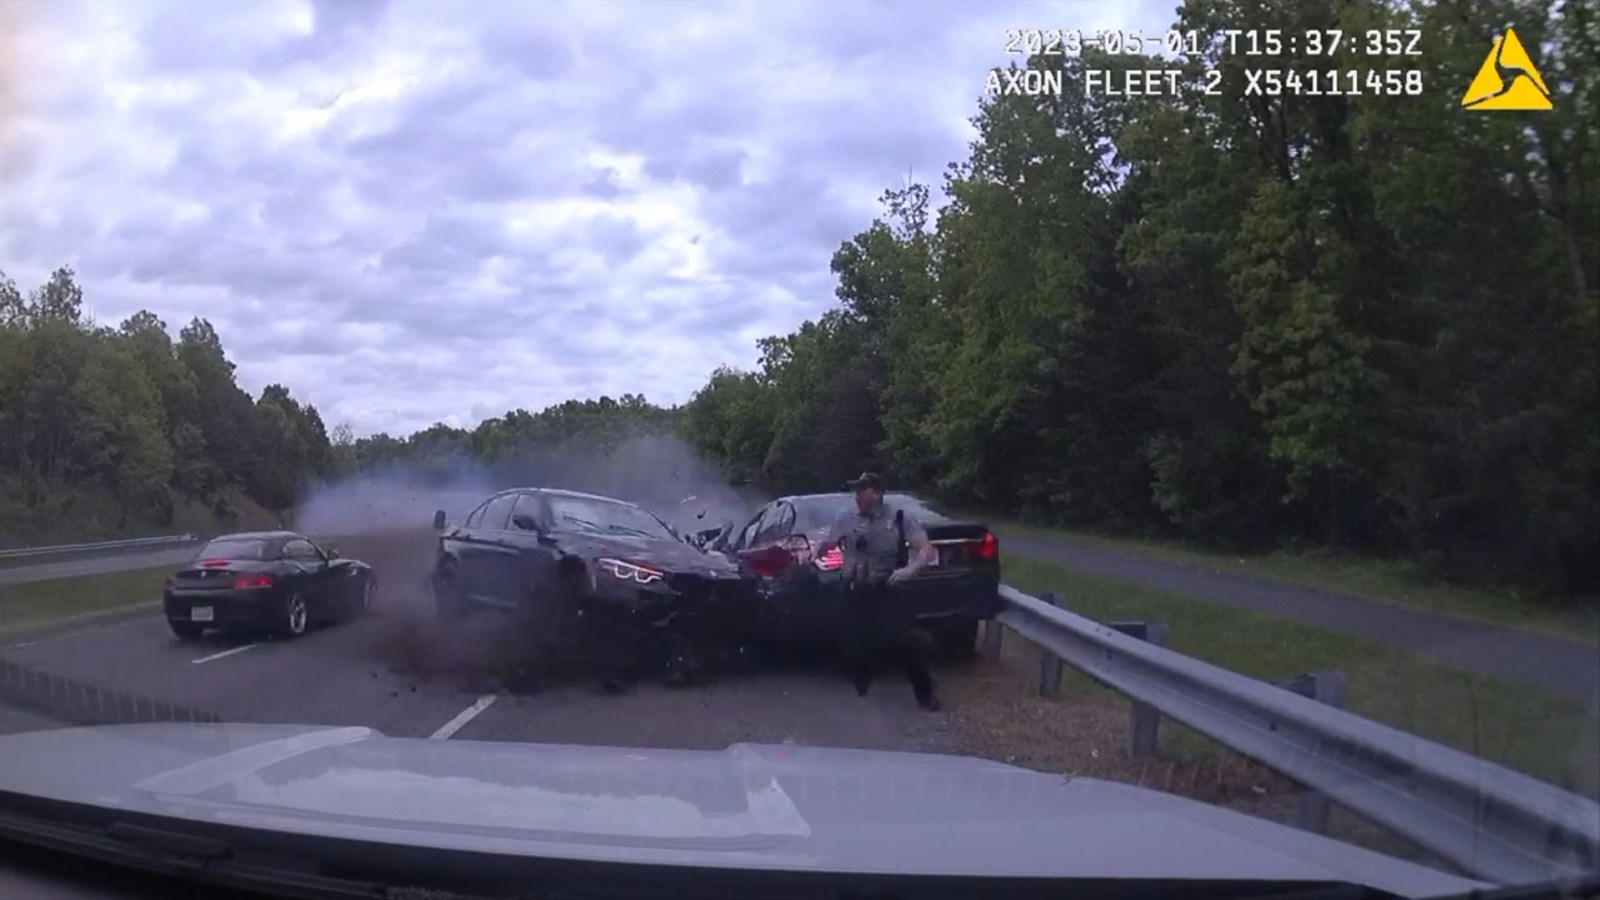 Video of car crash during traffic stop injuring officer, 4 others in Fairfax County released